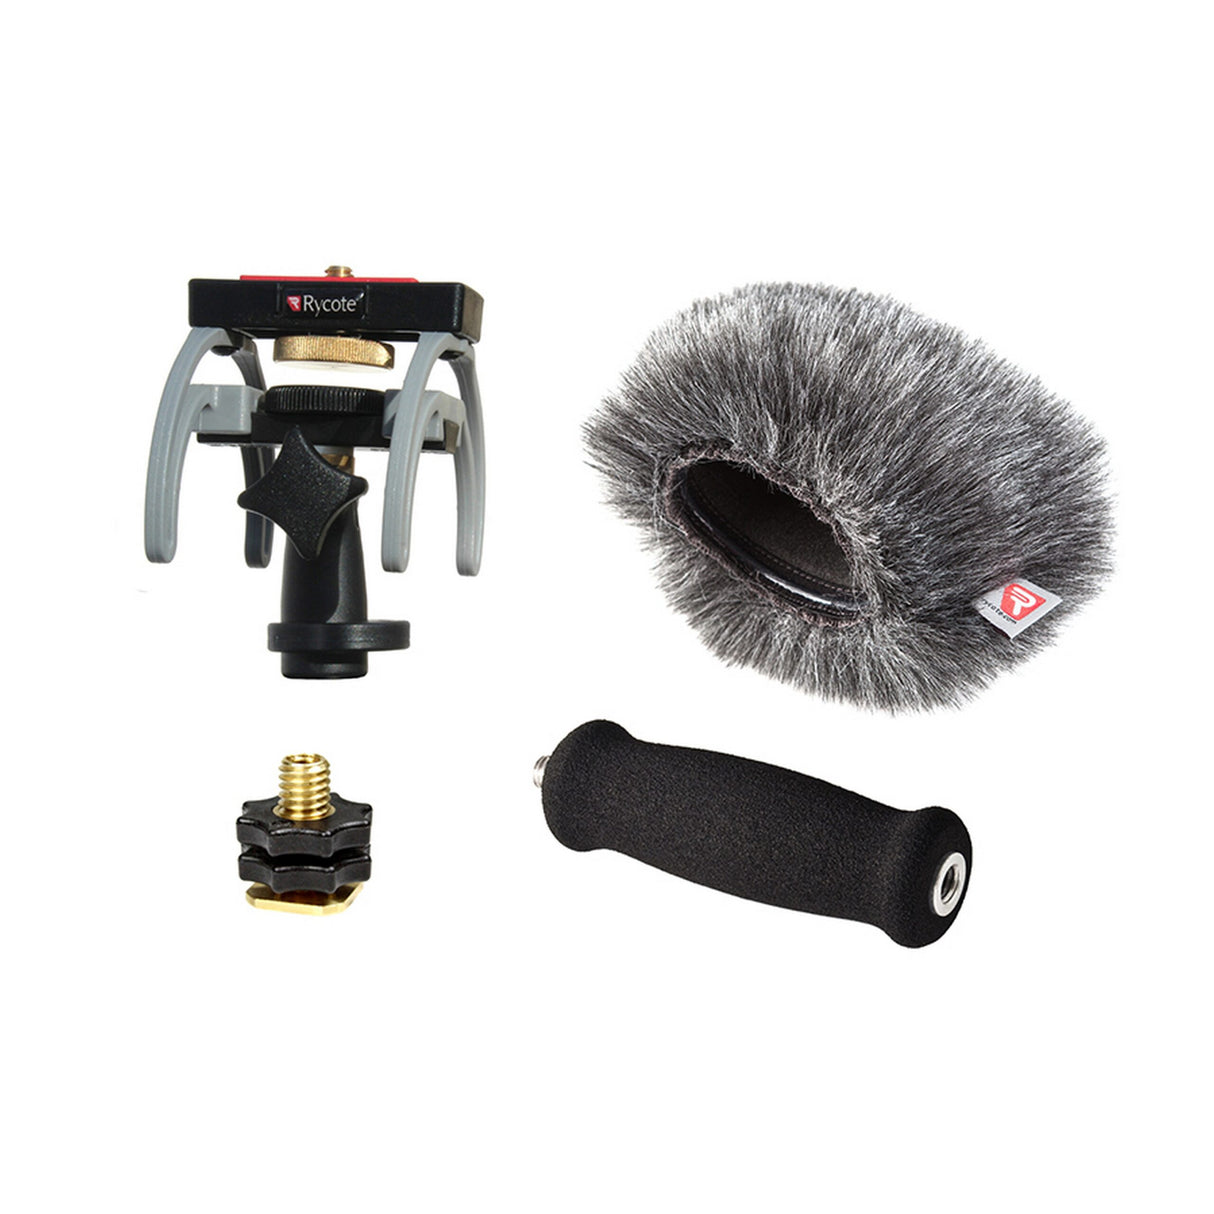 Rycote Audio Kit for Sony PCM-D100